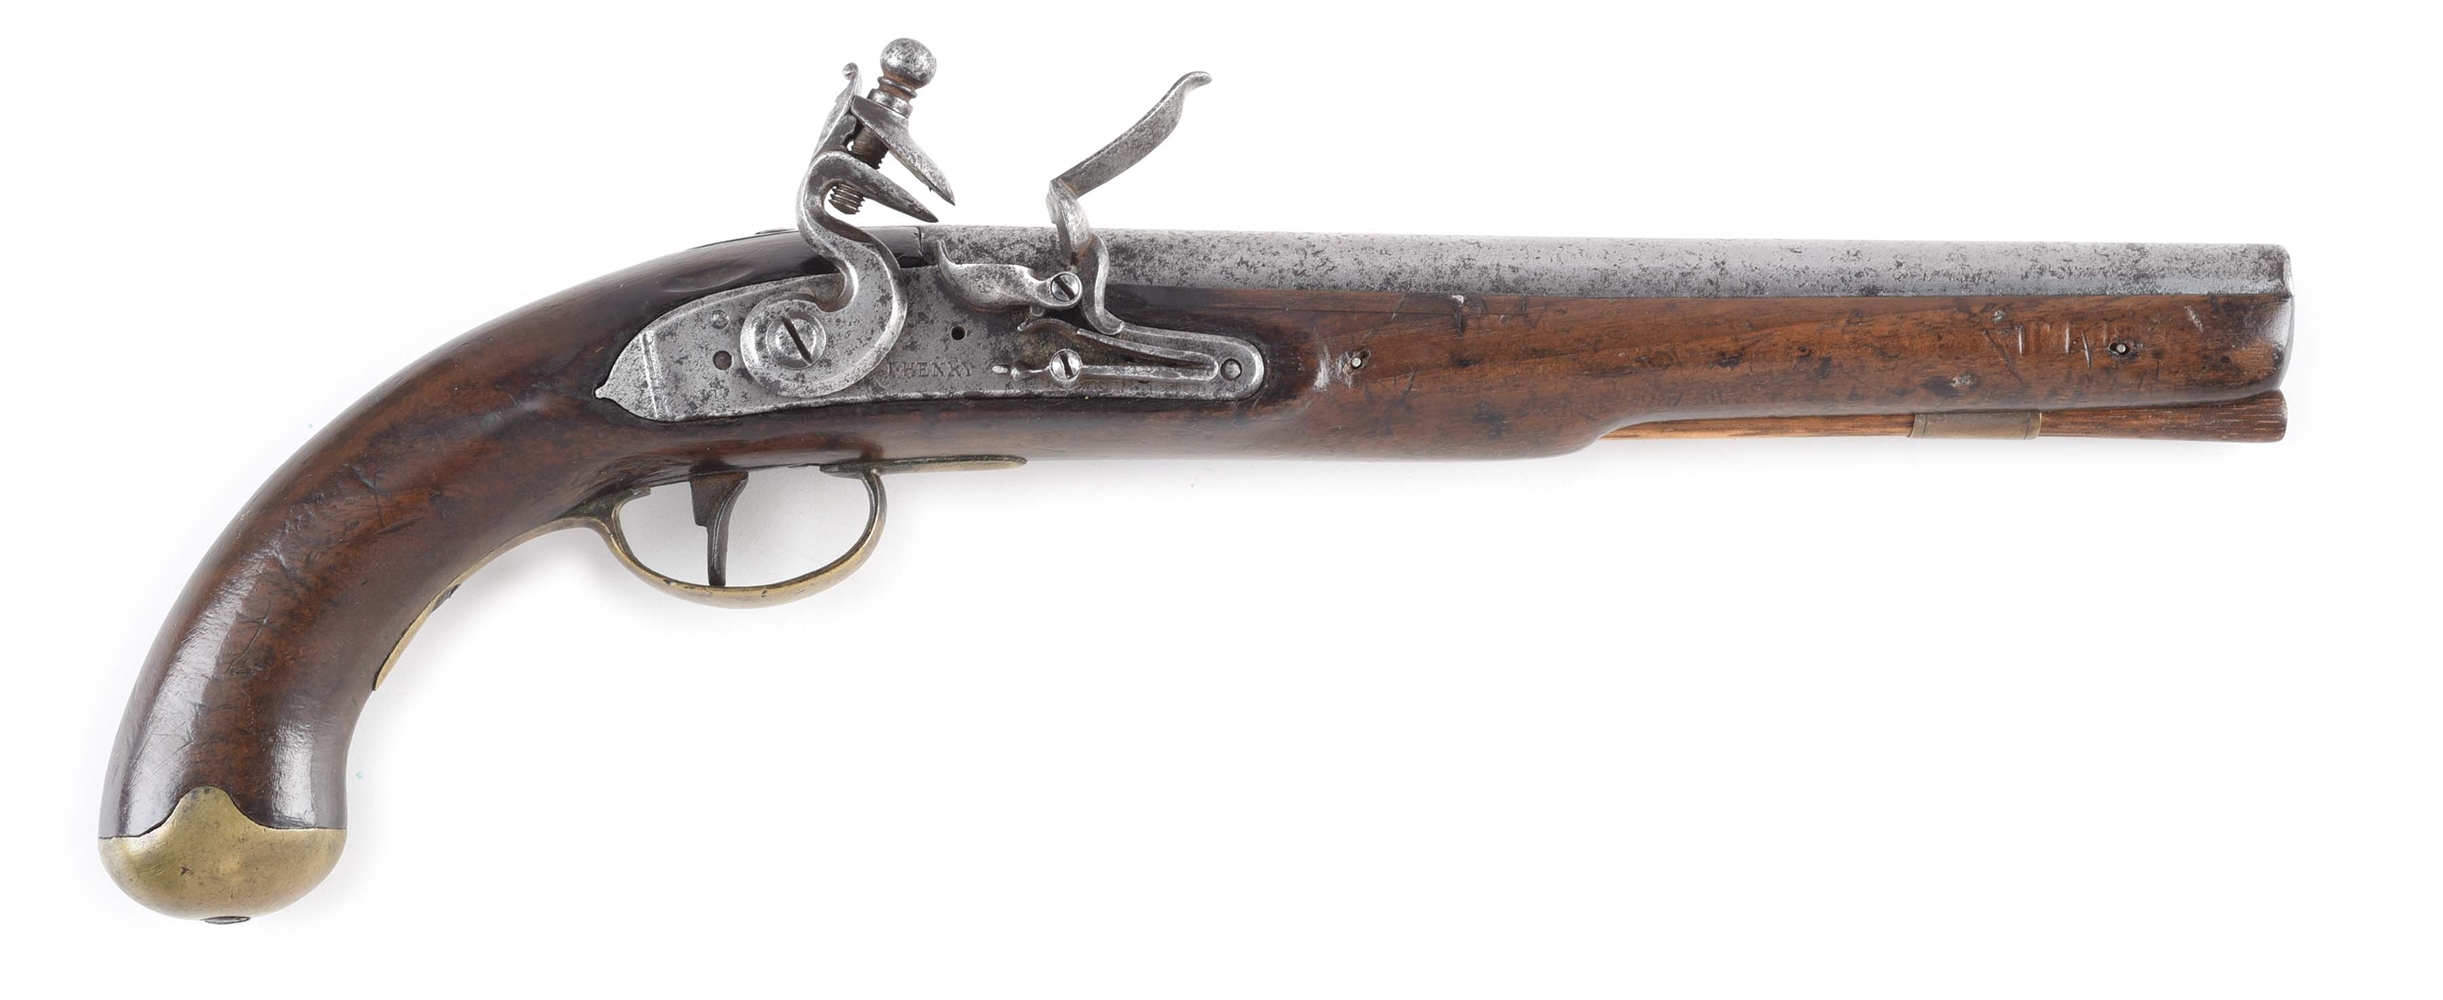 (A) EXTREMELY RARE FLINTLOCK NAVAL CONTRACT BOARDING PISTOL BY J. HENRY.